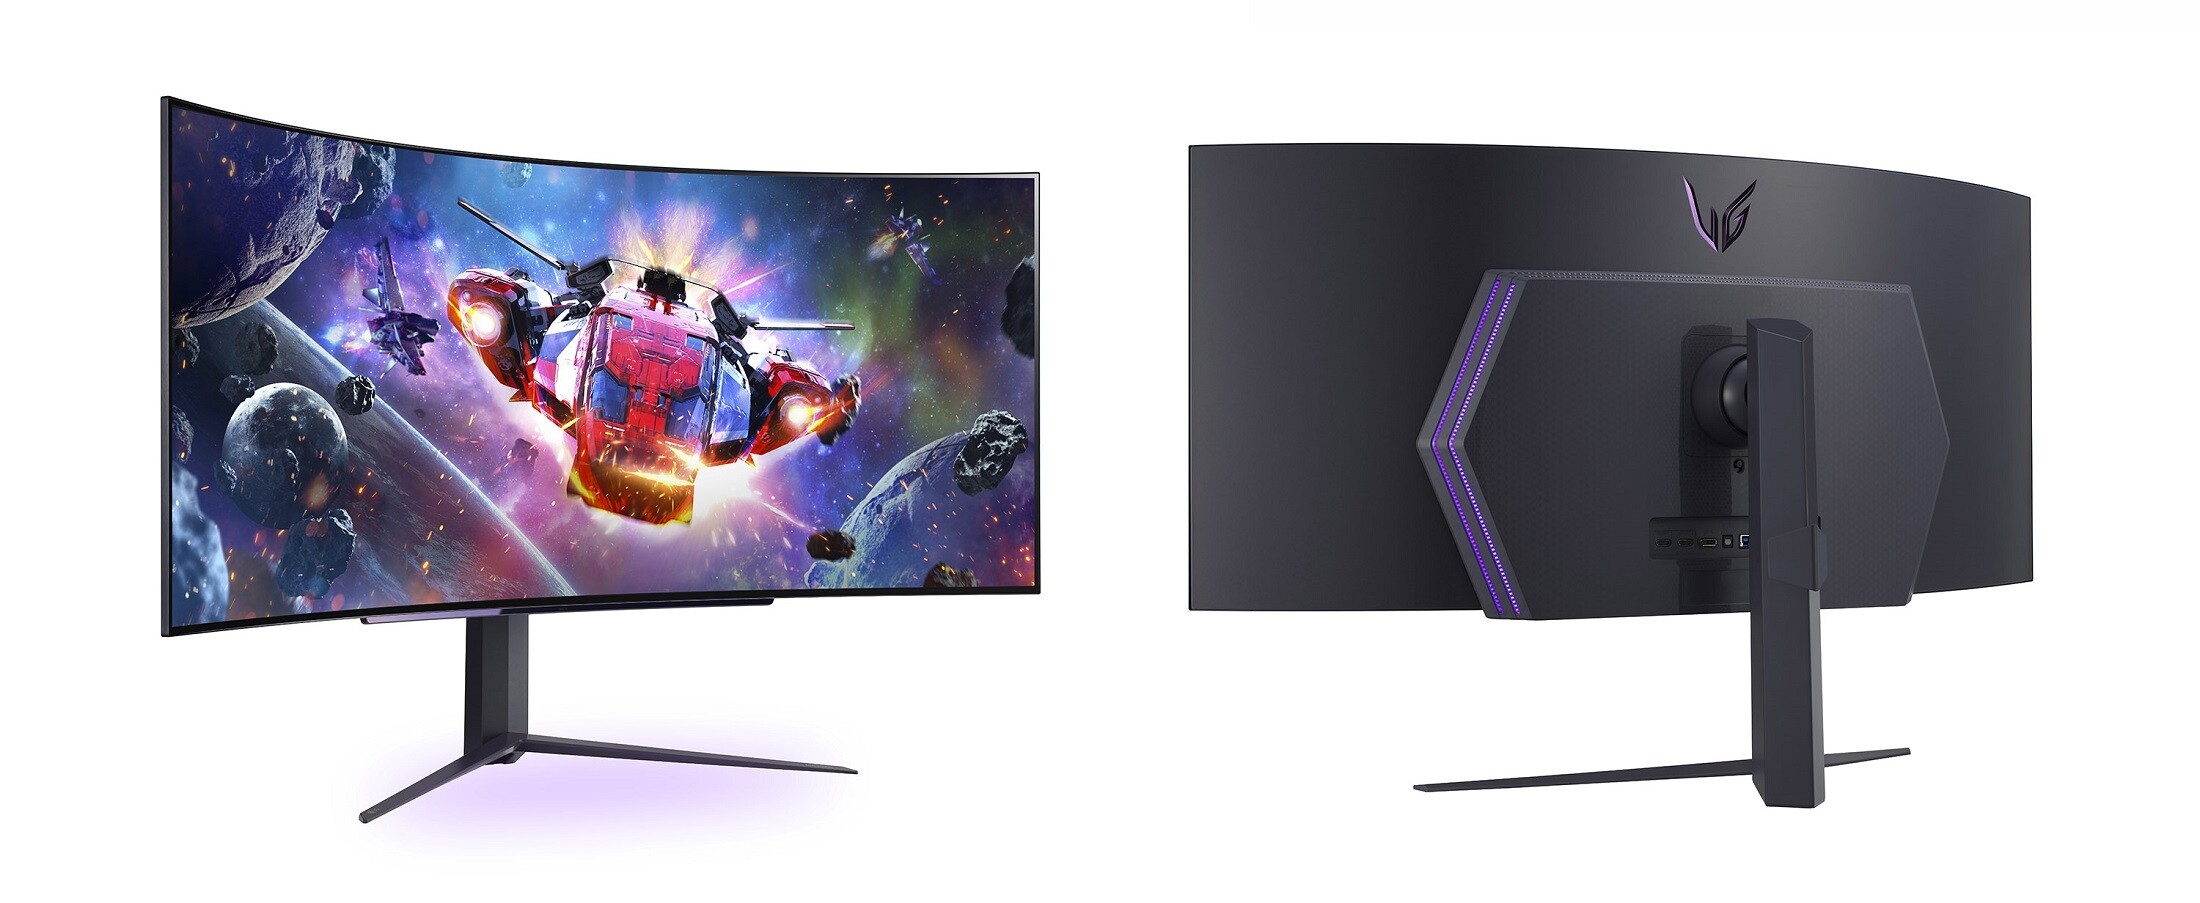 LG's new OLED 240Hz monitors give 1440p gaming the respect it deserves